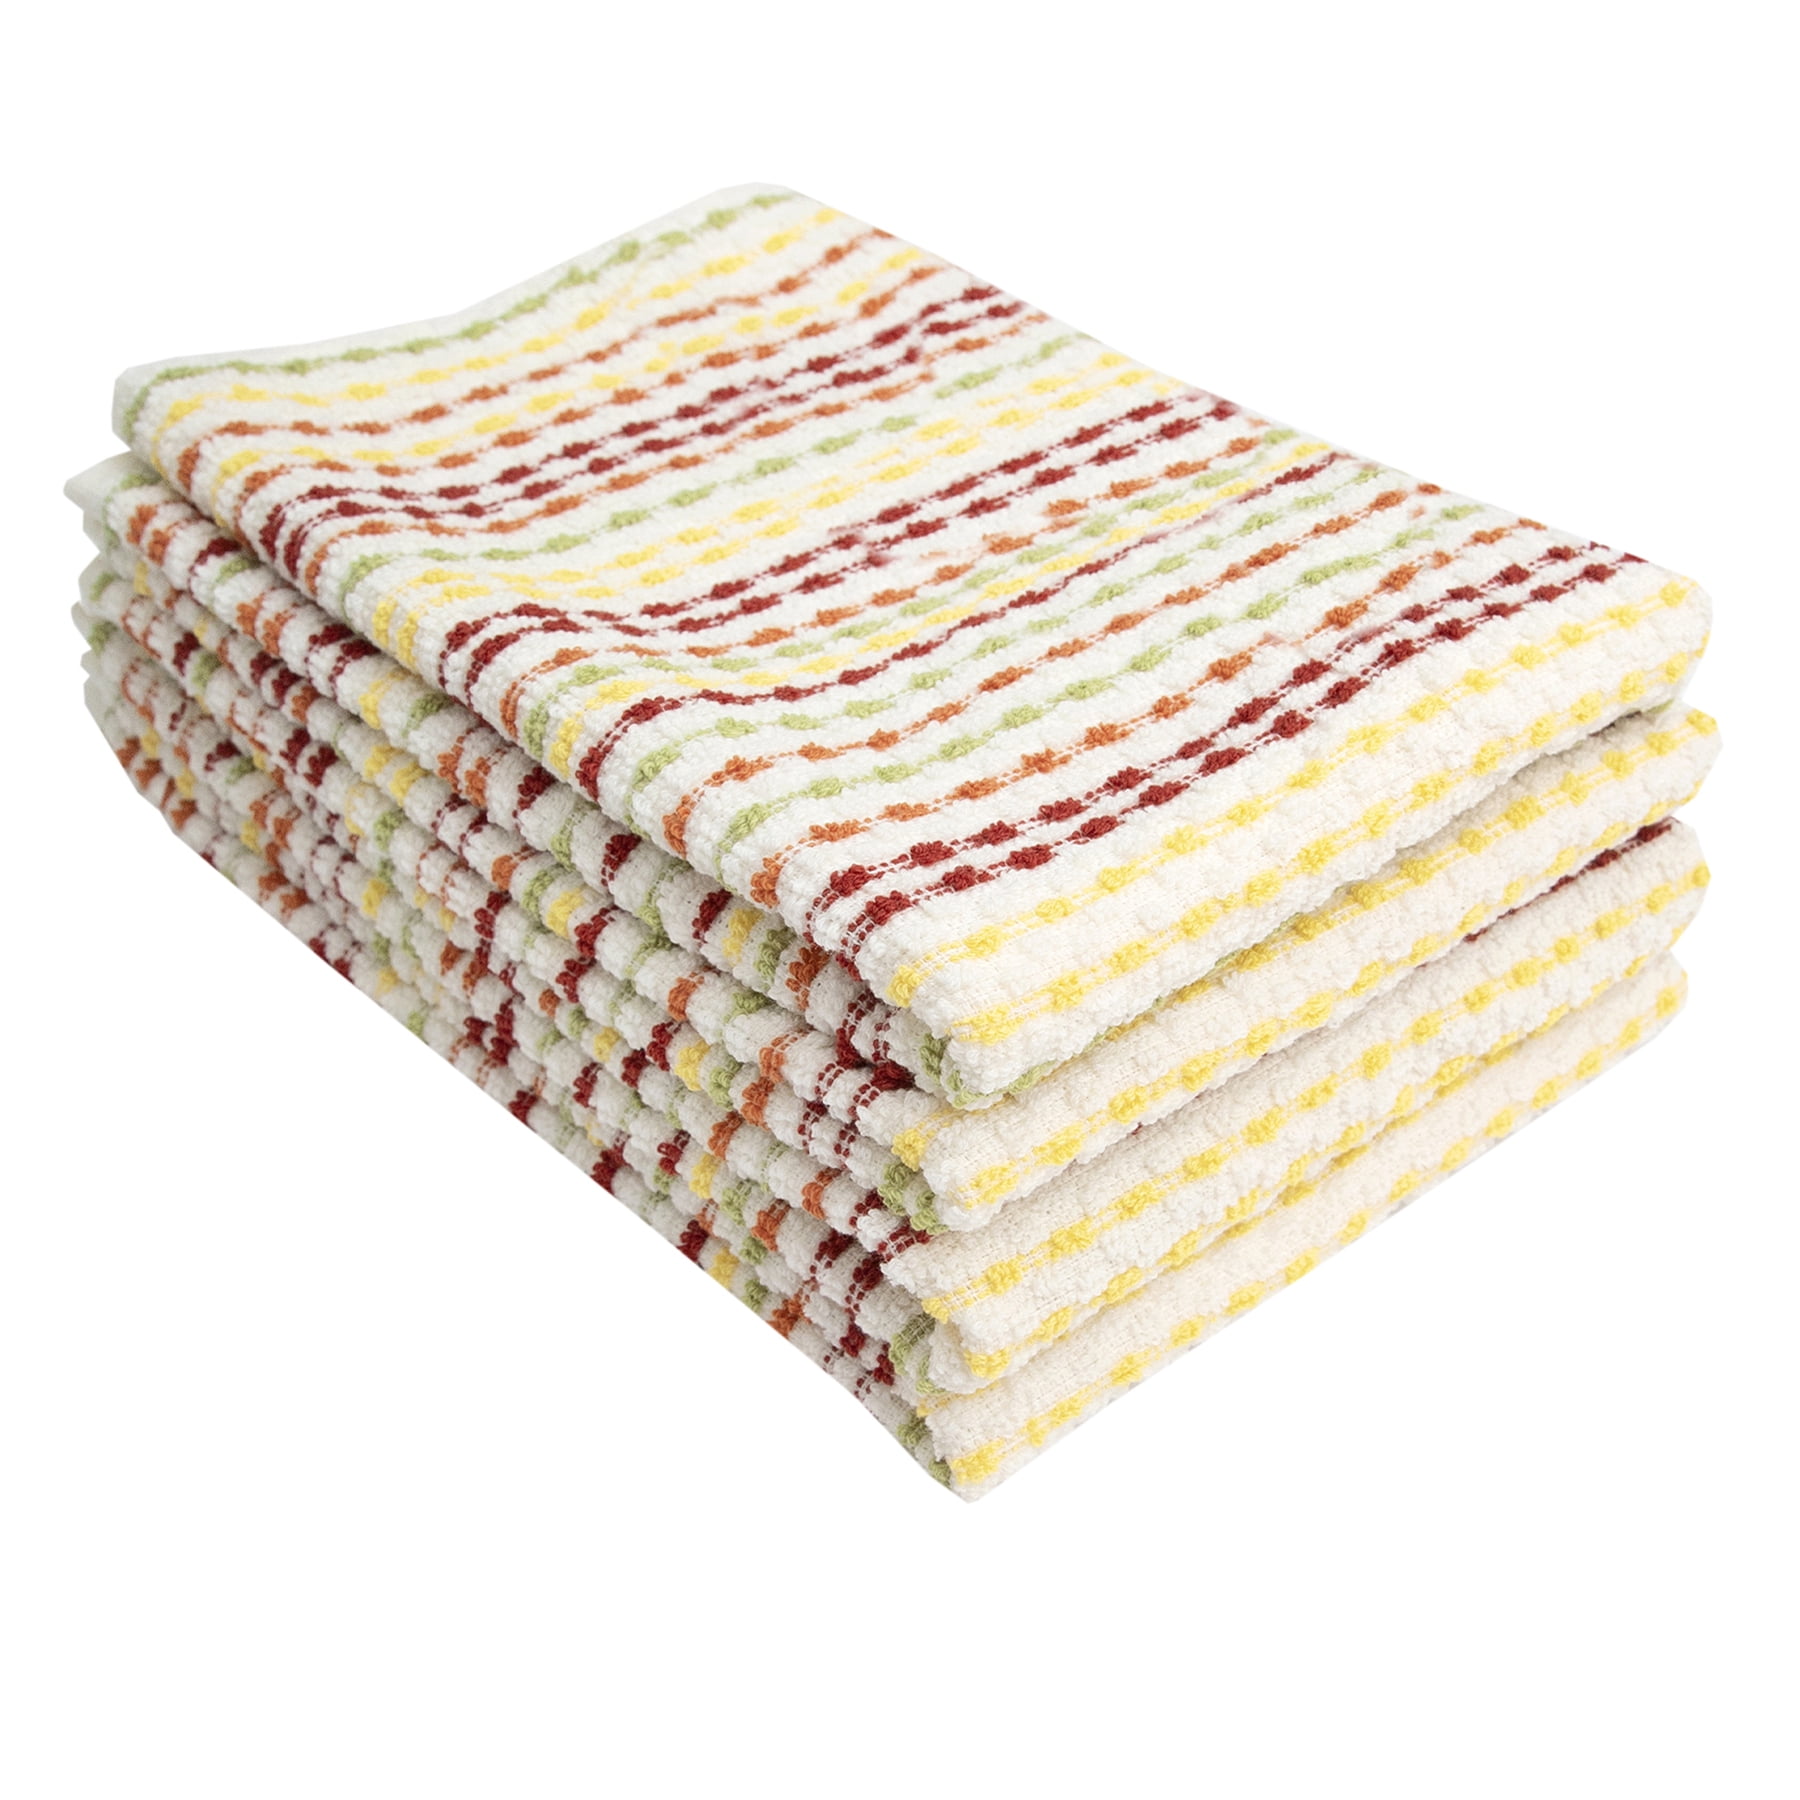 The Pioneer Woman Celia 4-Pack Kitchen Towels, Cotton